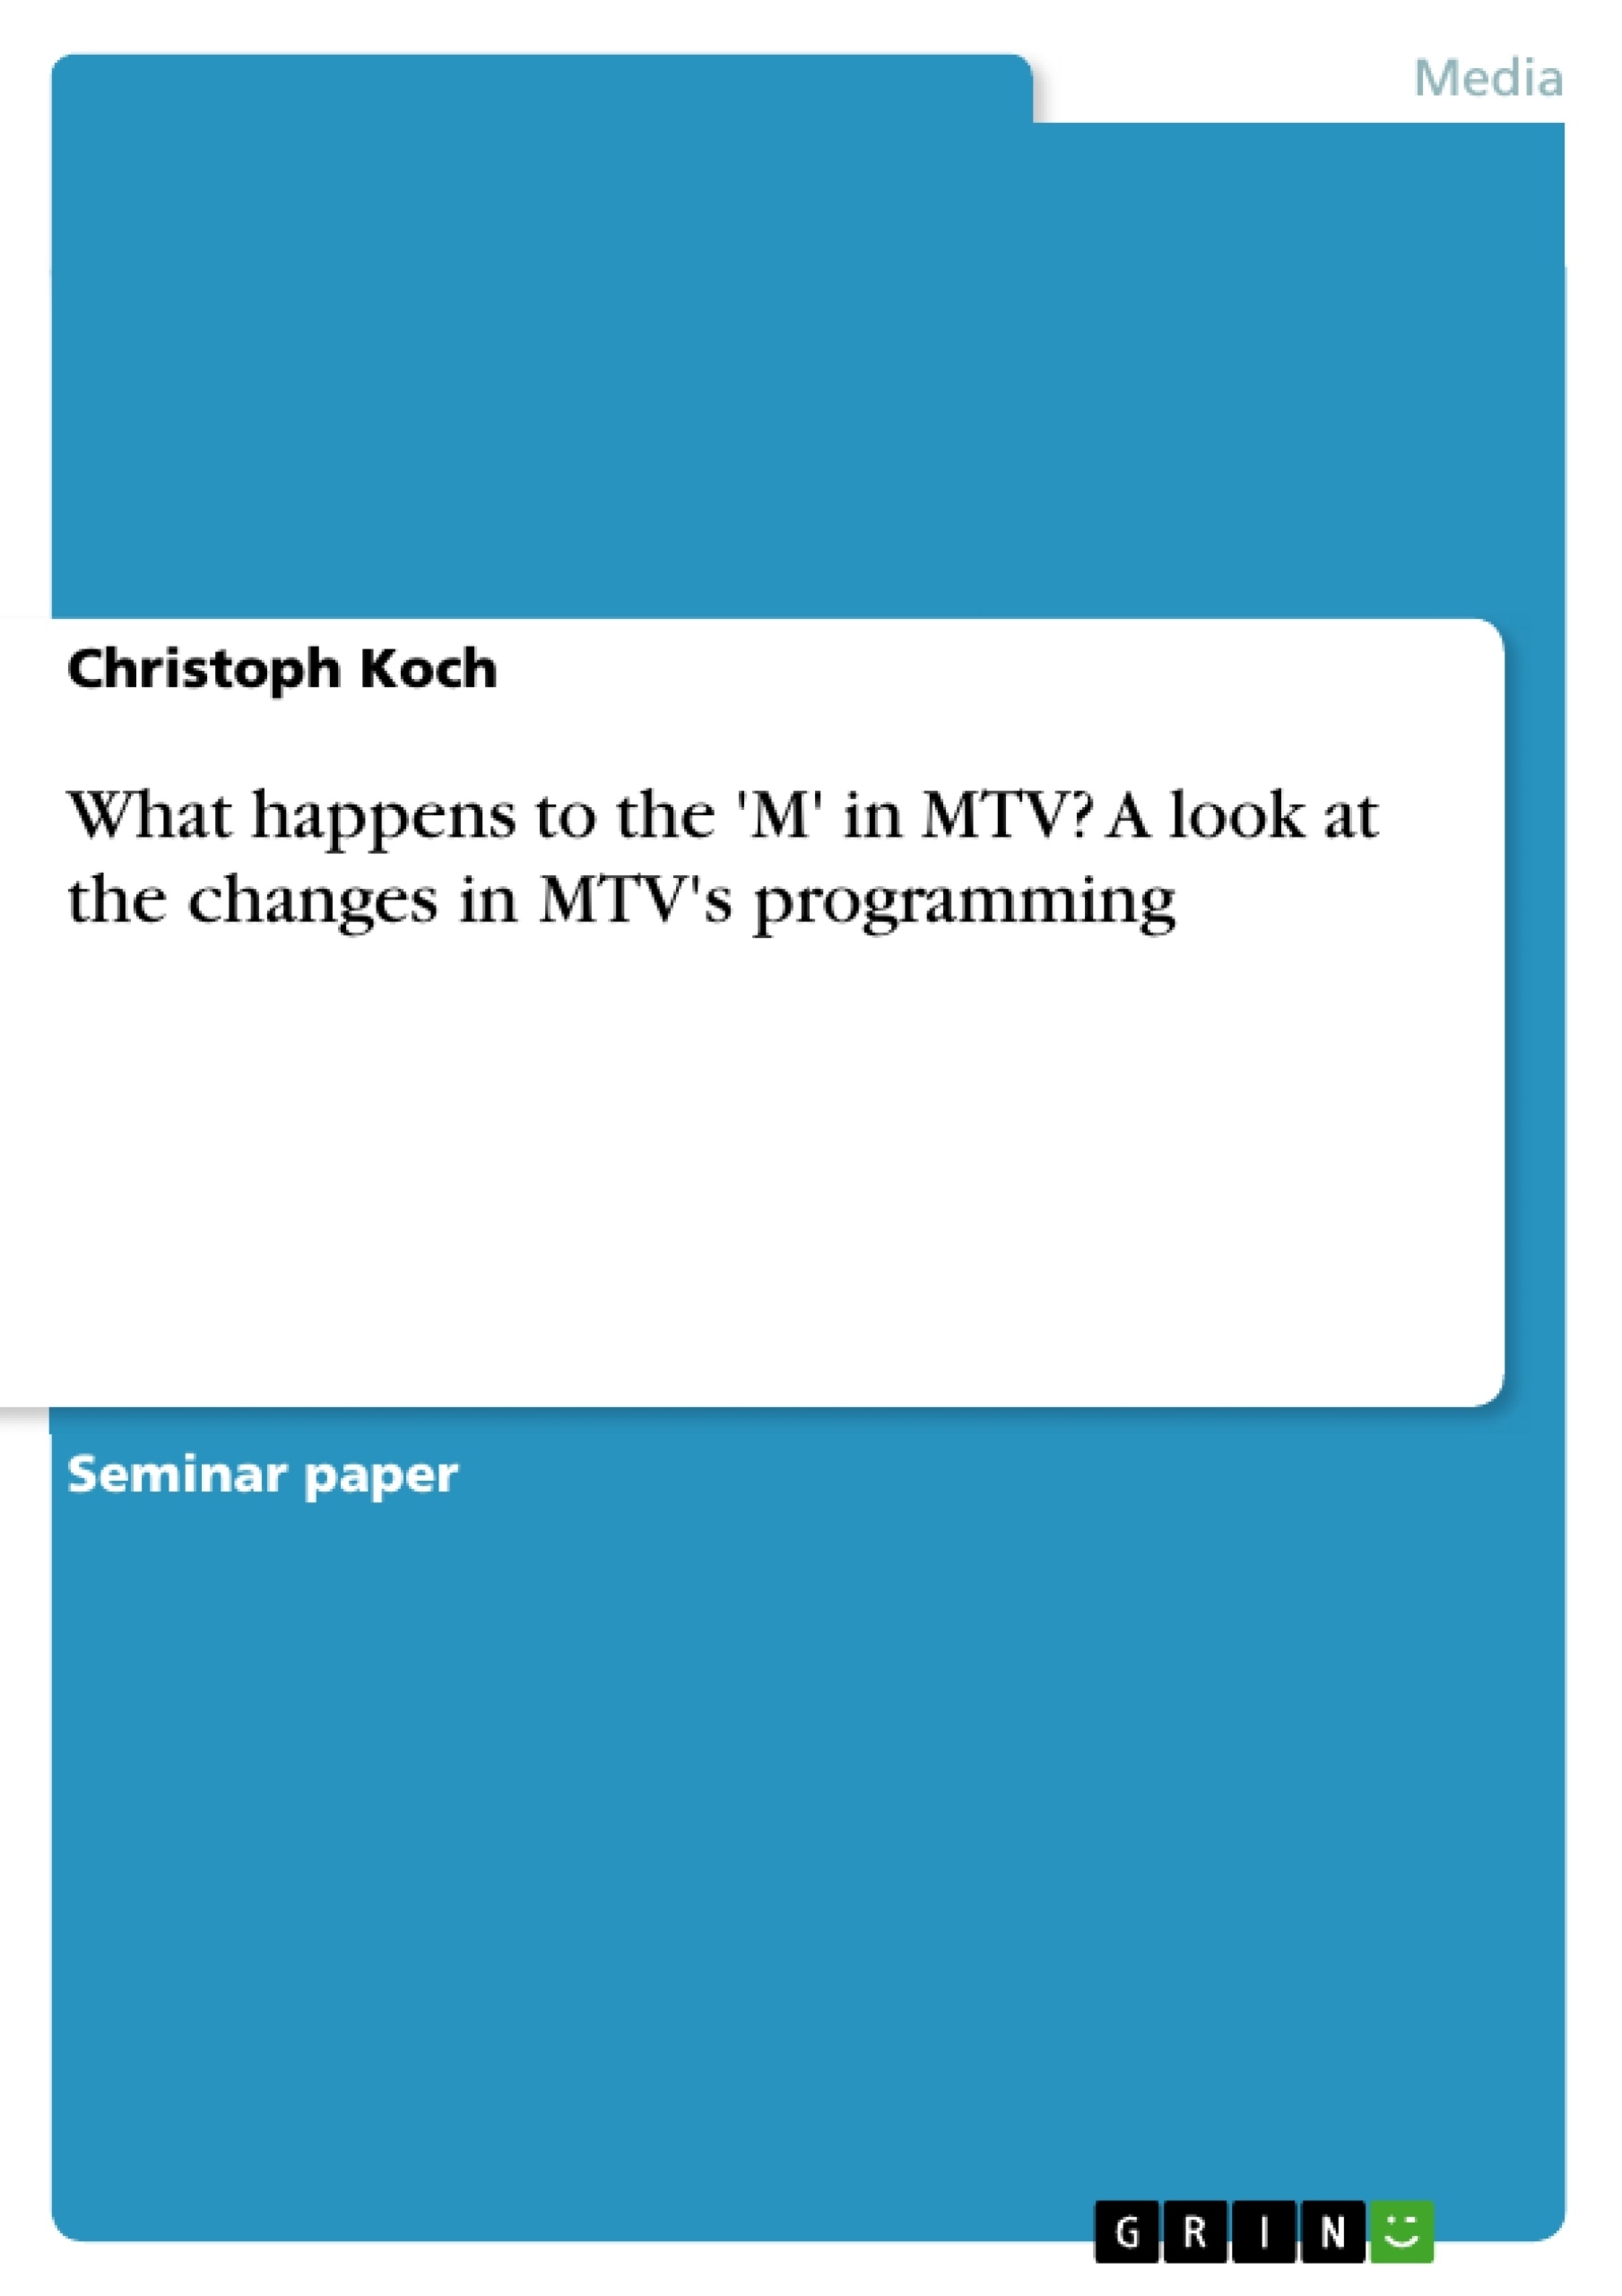 Título: What happens to the 'M' in MTV? A look at the changes in MTV's programming